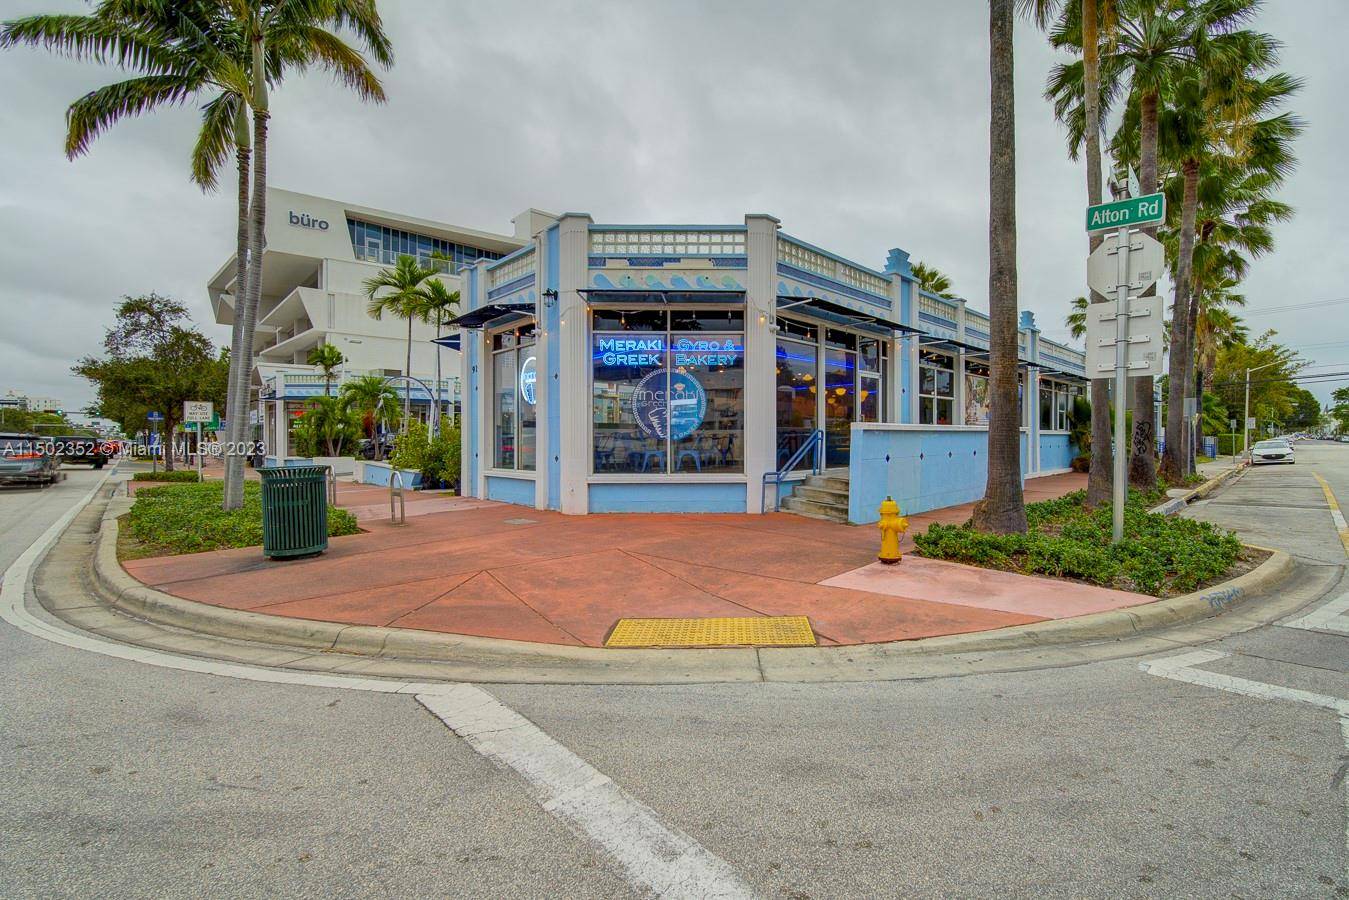 Exceptional opportunity to acquire a well established restaurant with a complete inventory, strategically located in the heart of Miami Beach.